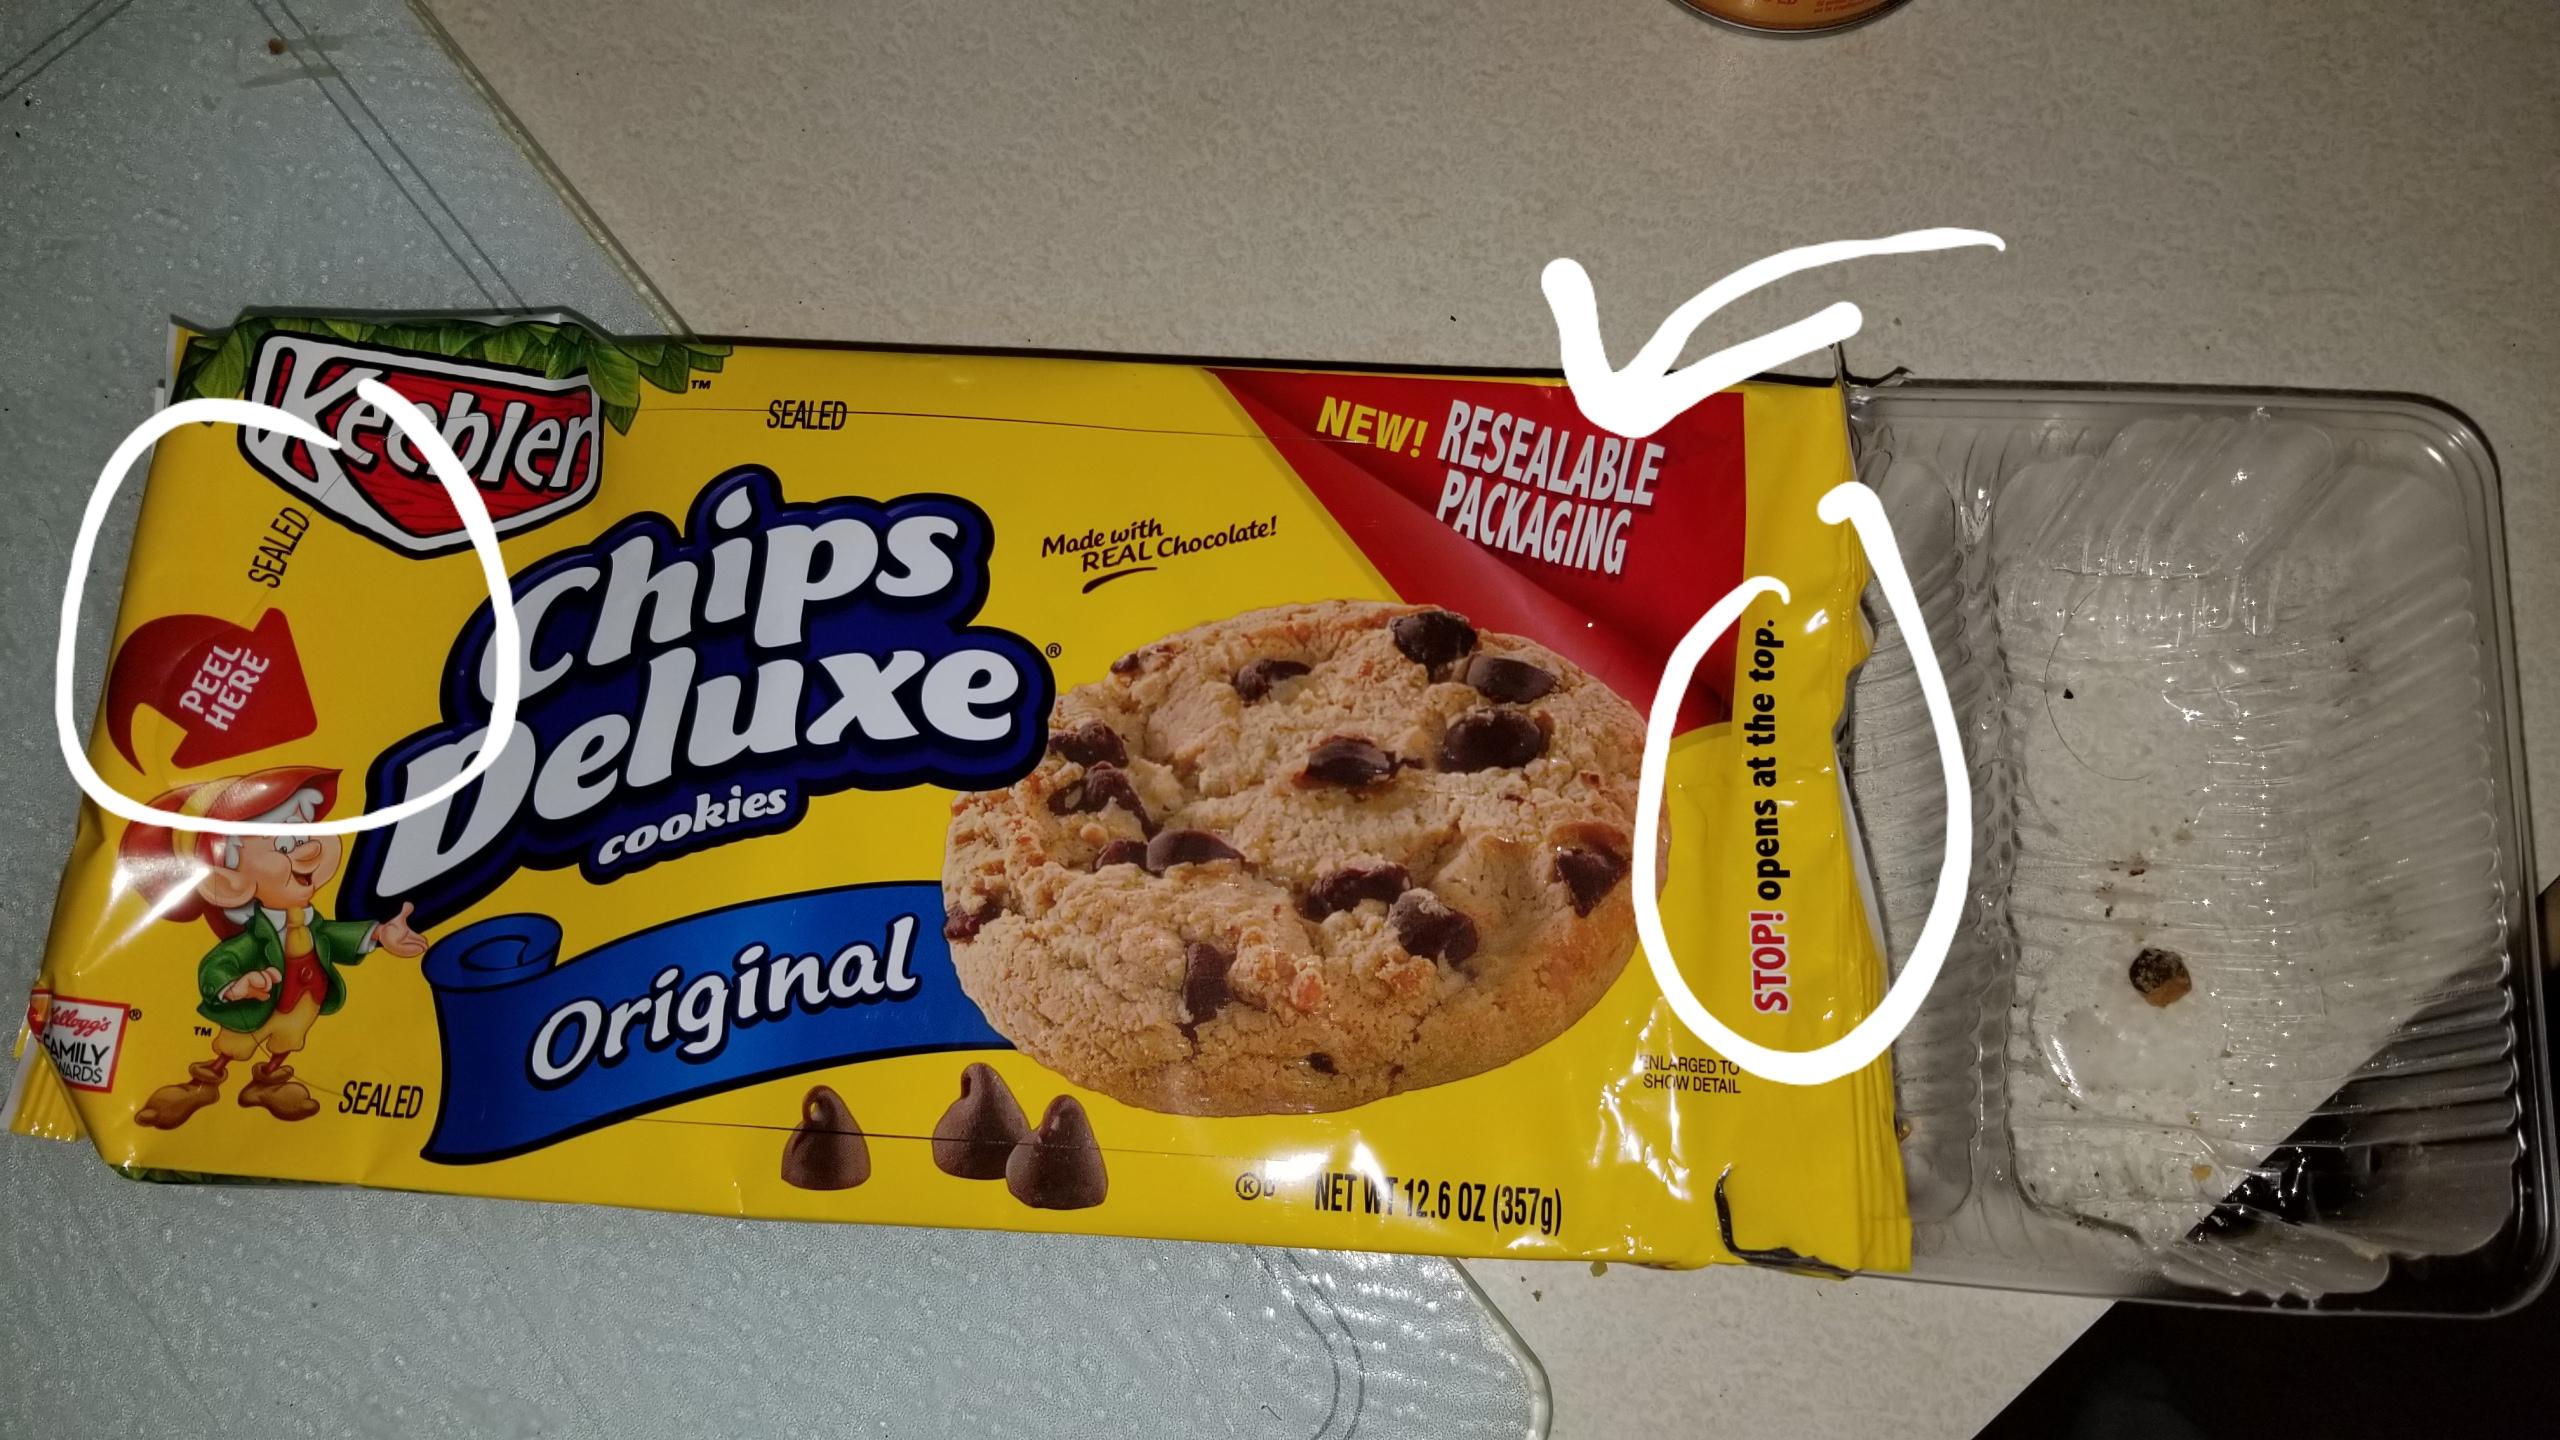 23 Mildly Infuriating Things That Might Trigger Your OCD